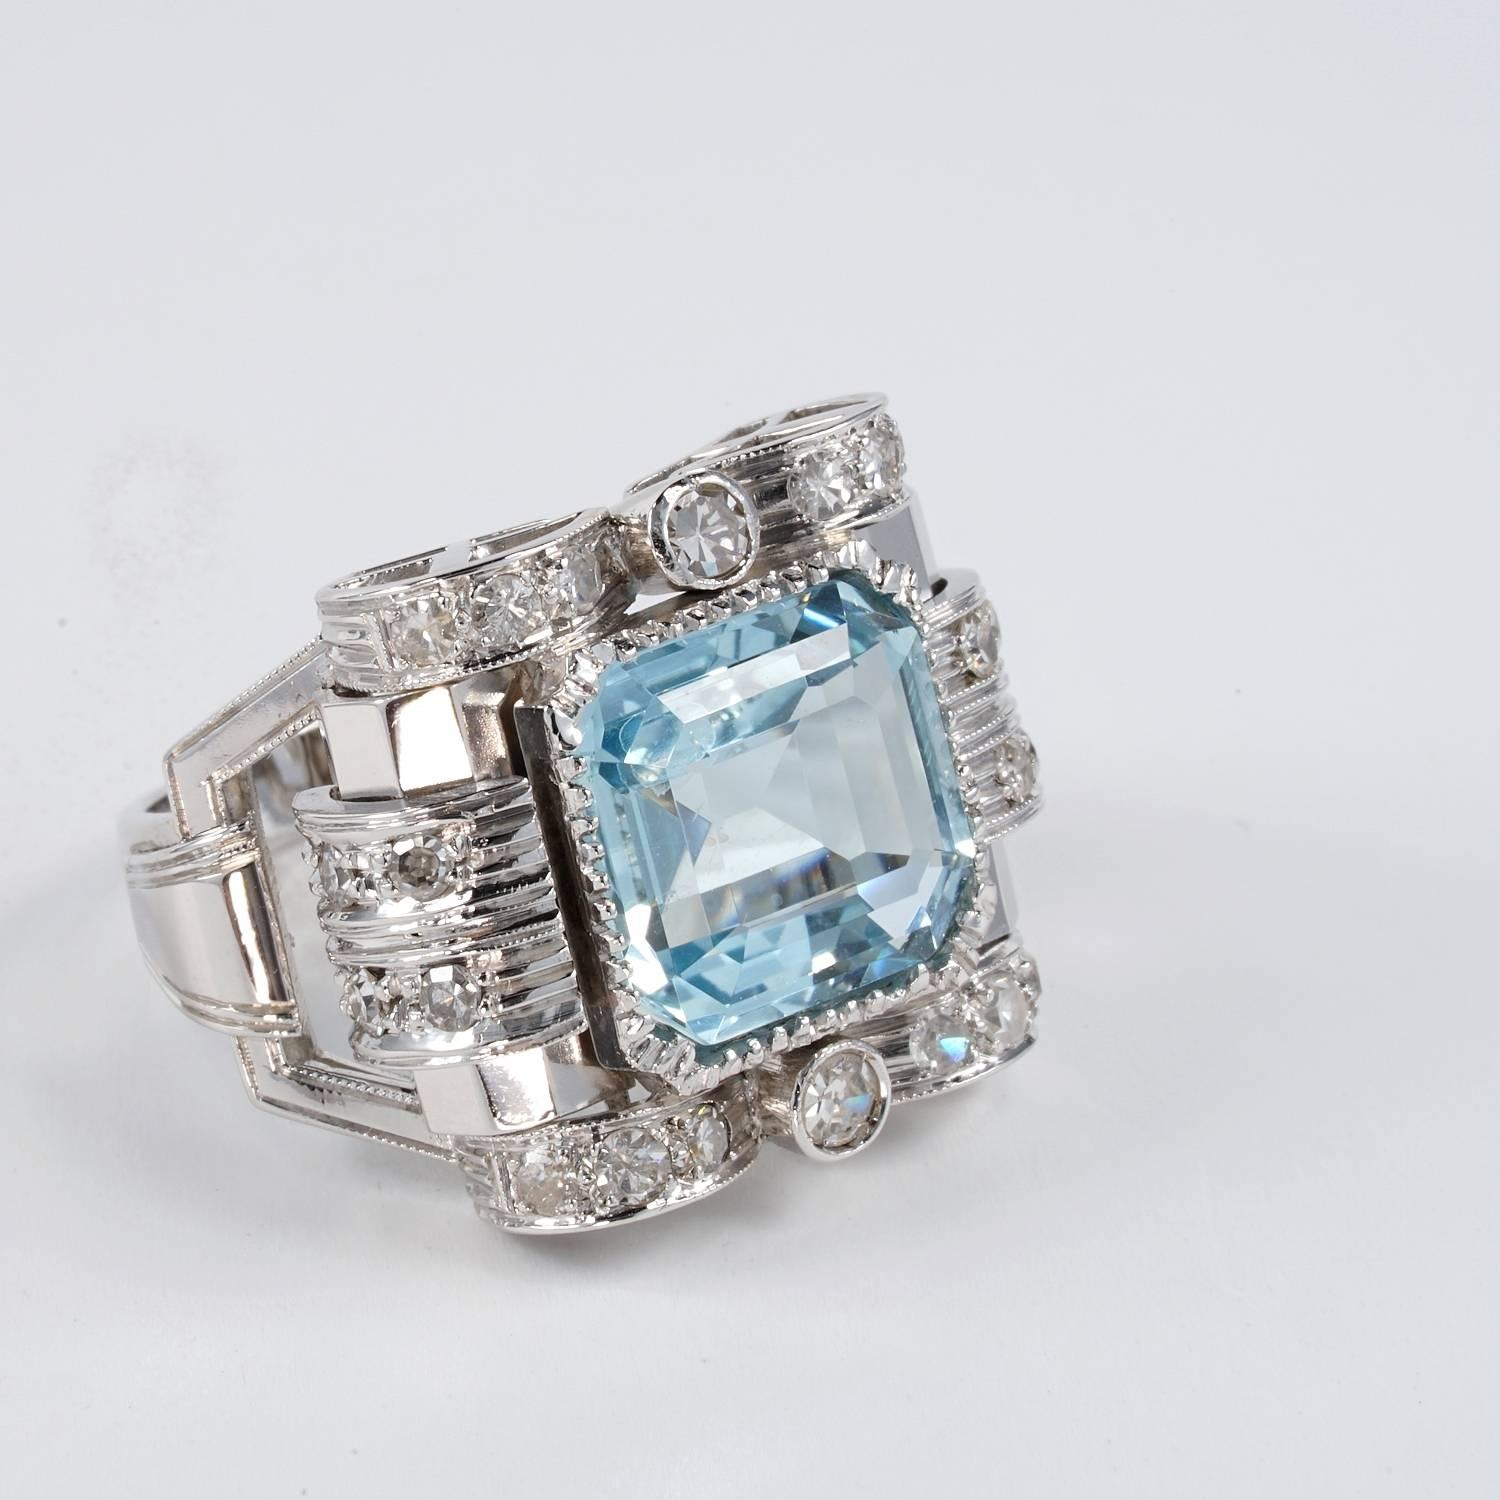 Strong character, beautiful designed, auntentic Art Deco ring hand crafted of solid 18 KT white gold.
Centrally set with a natural Aquamarine emerald cut of 5.20 Ct.
Complementary old Swiss cut Diamonds for 1.20 Ct
Fantastic condition all